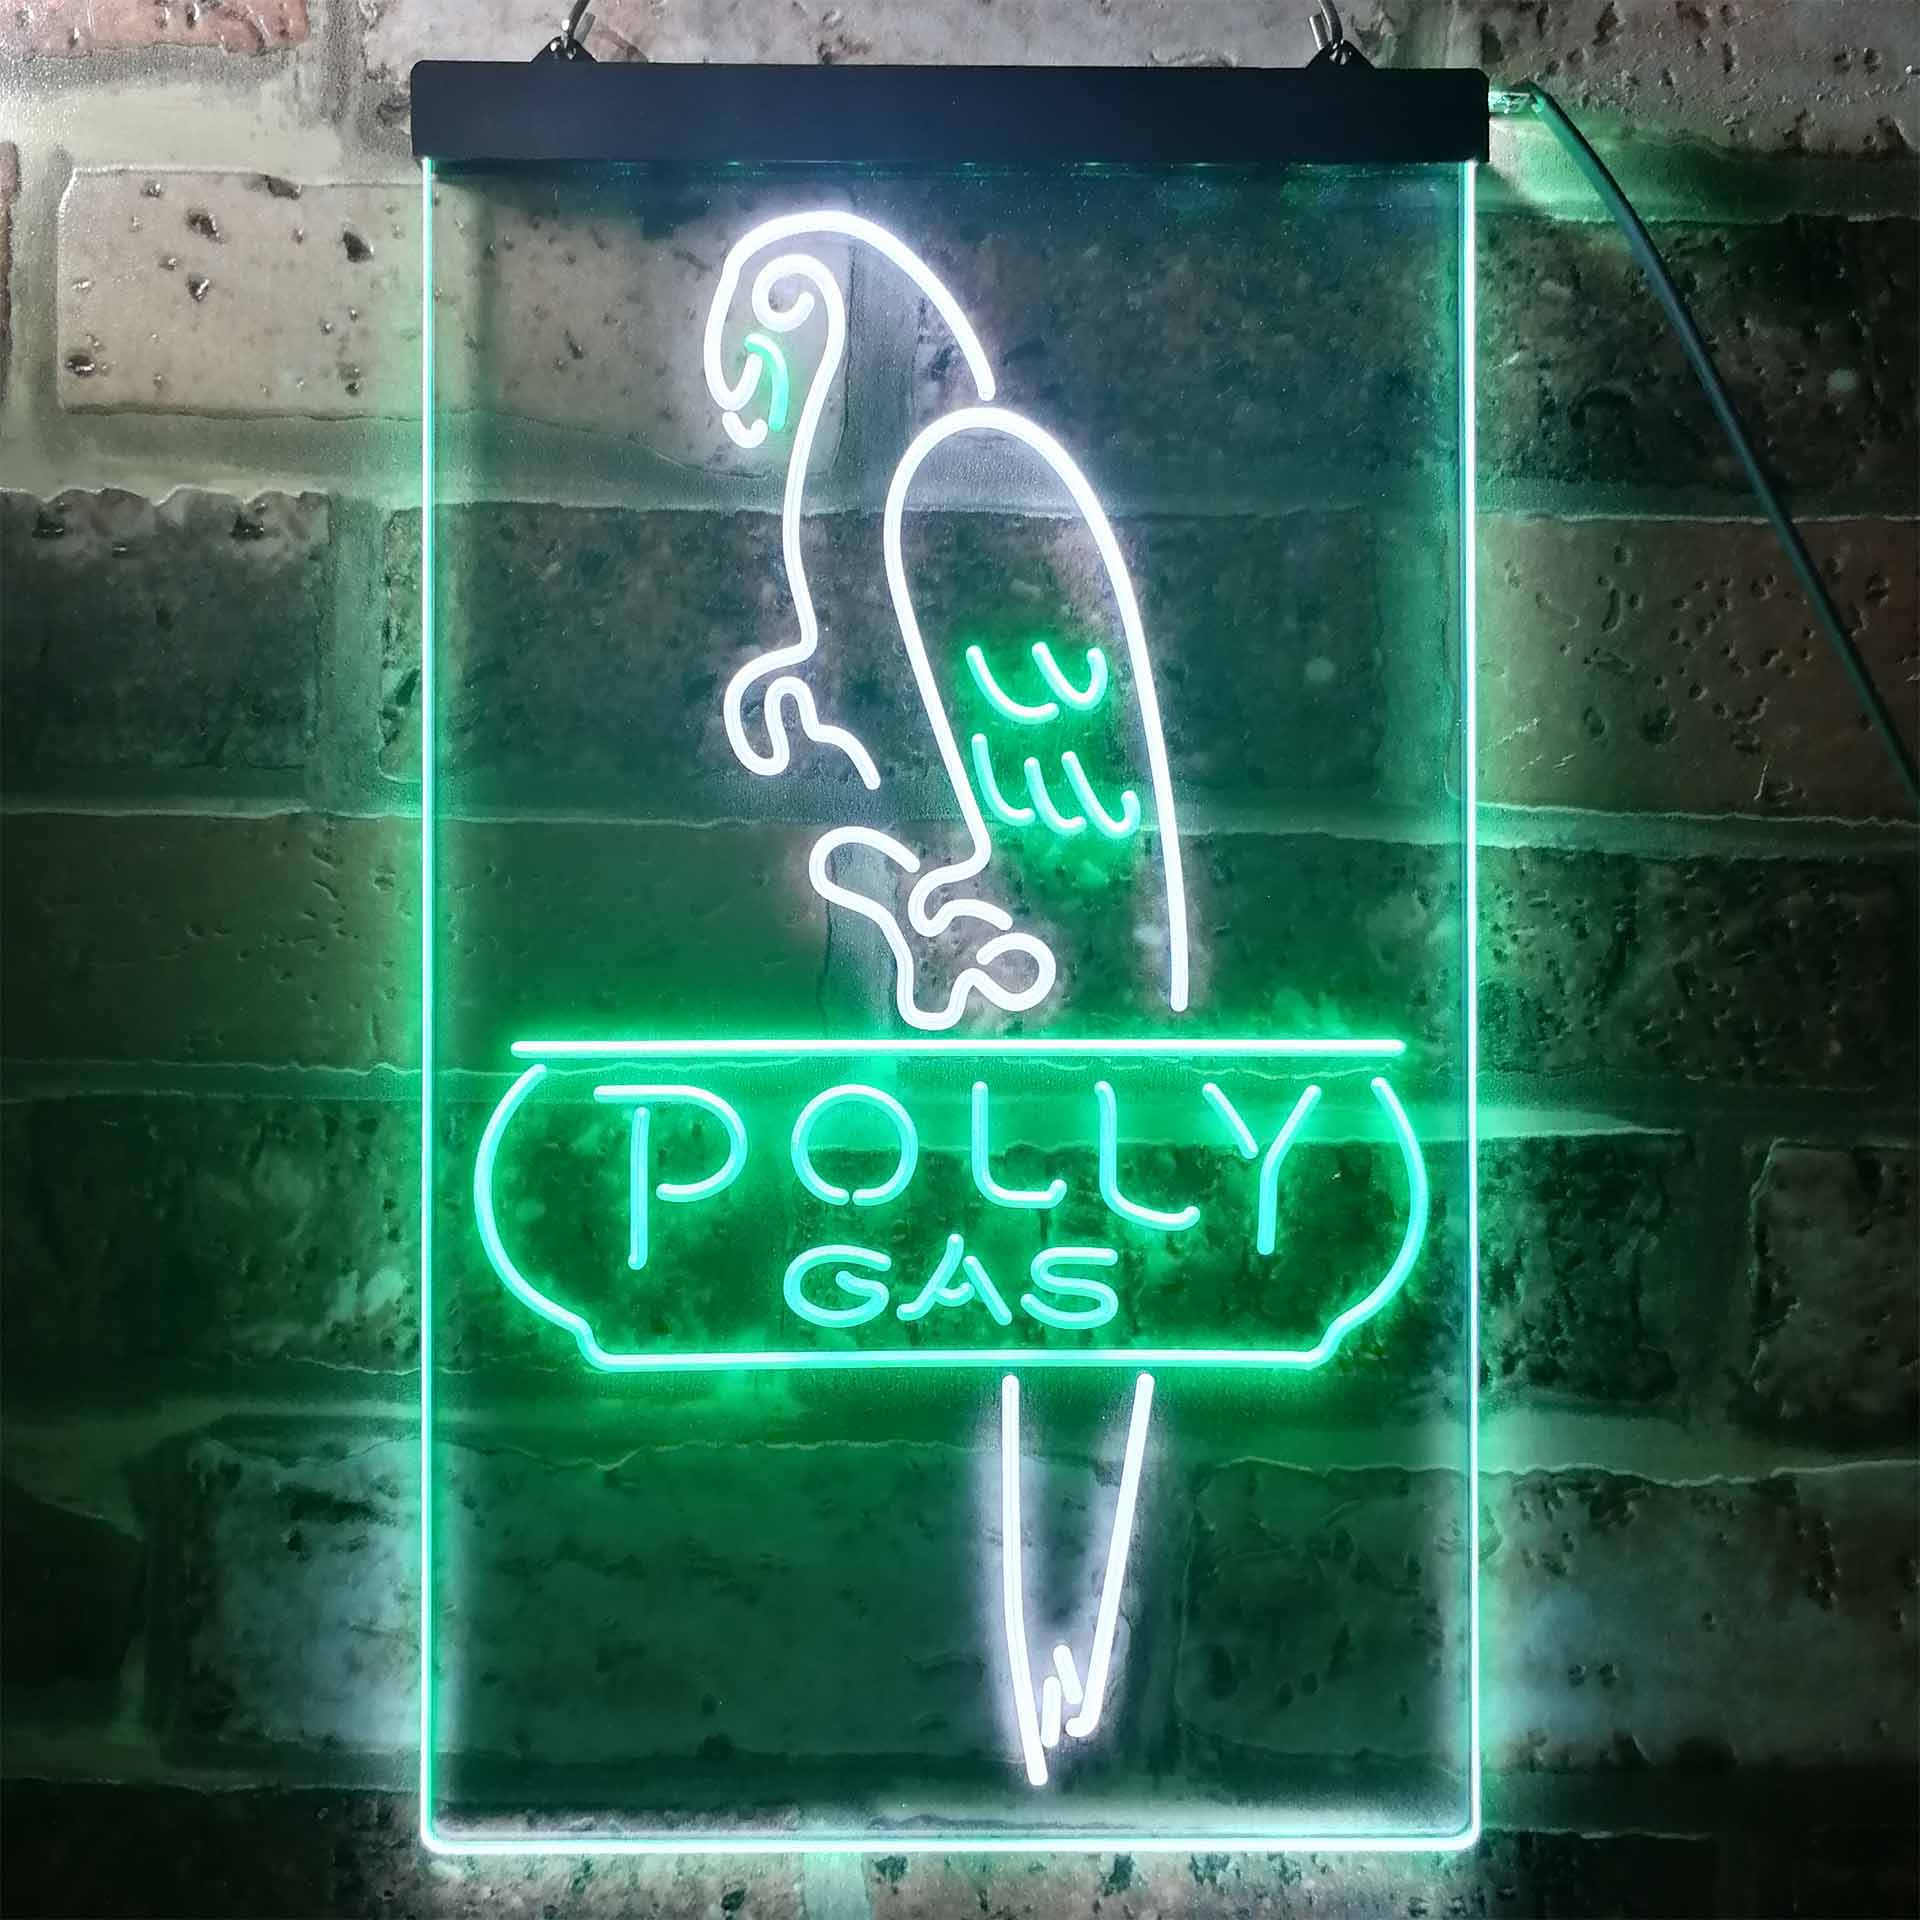 Polly Gas Parrot Neon LED Sign